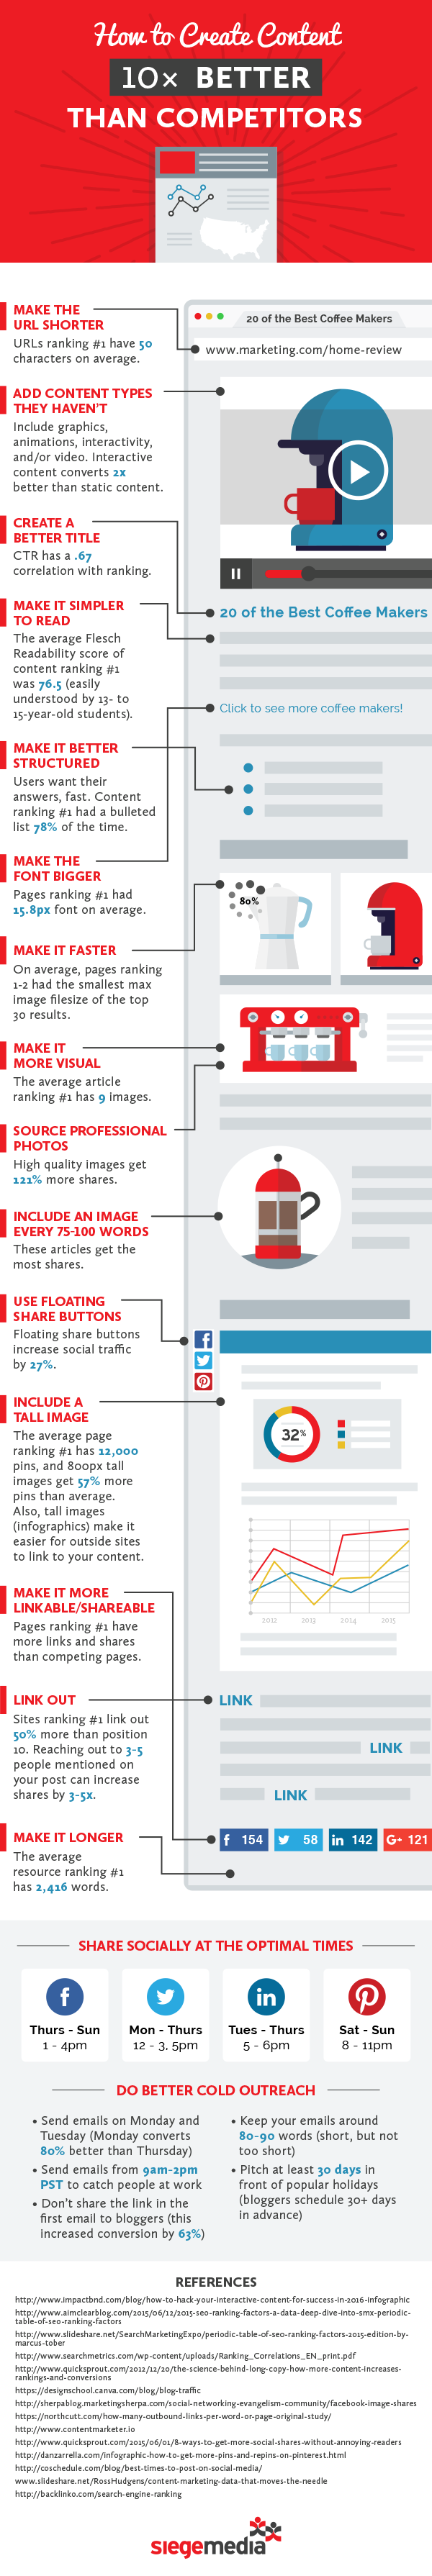 The anatomy of content that ranks NO. 1 - infographic